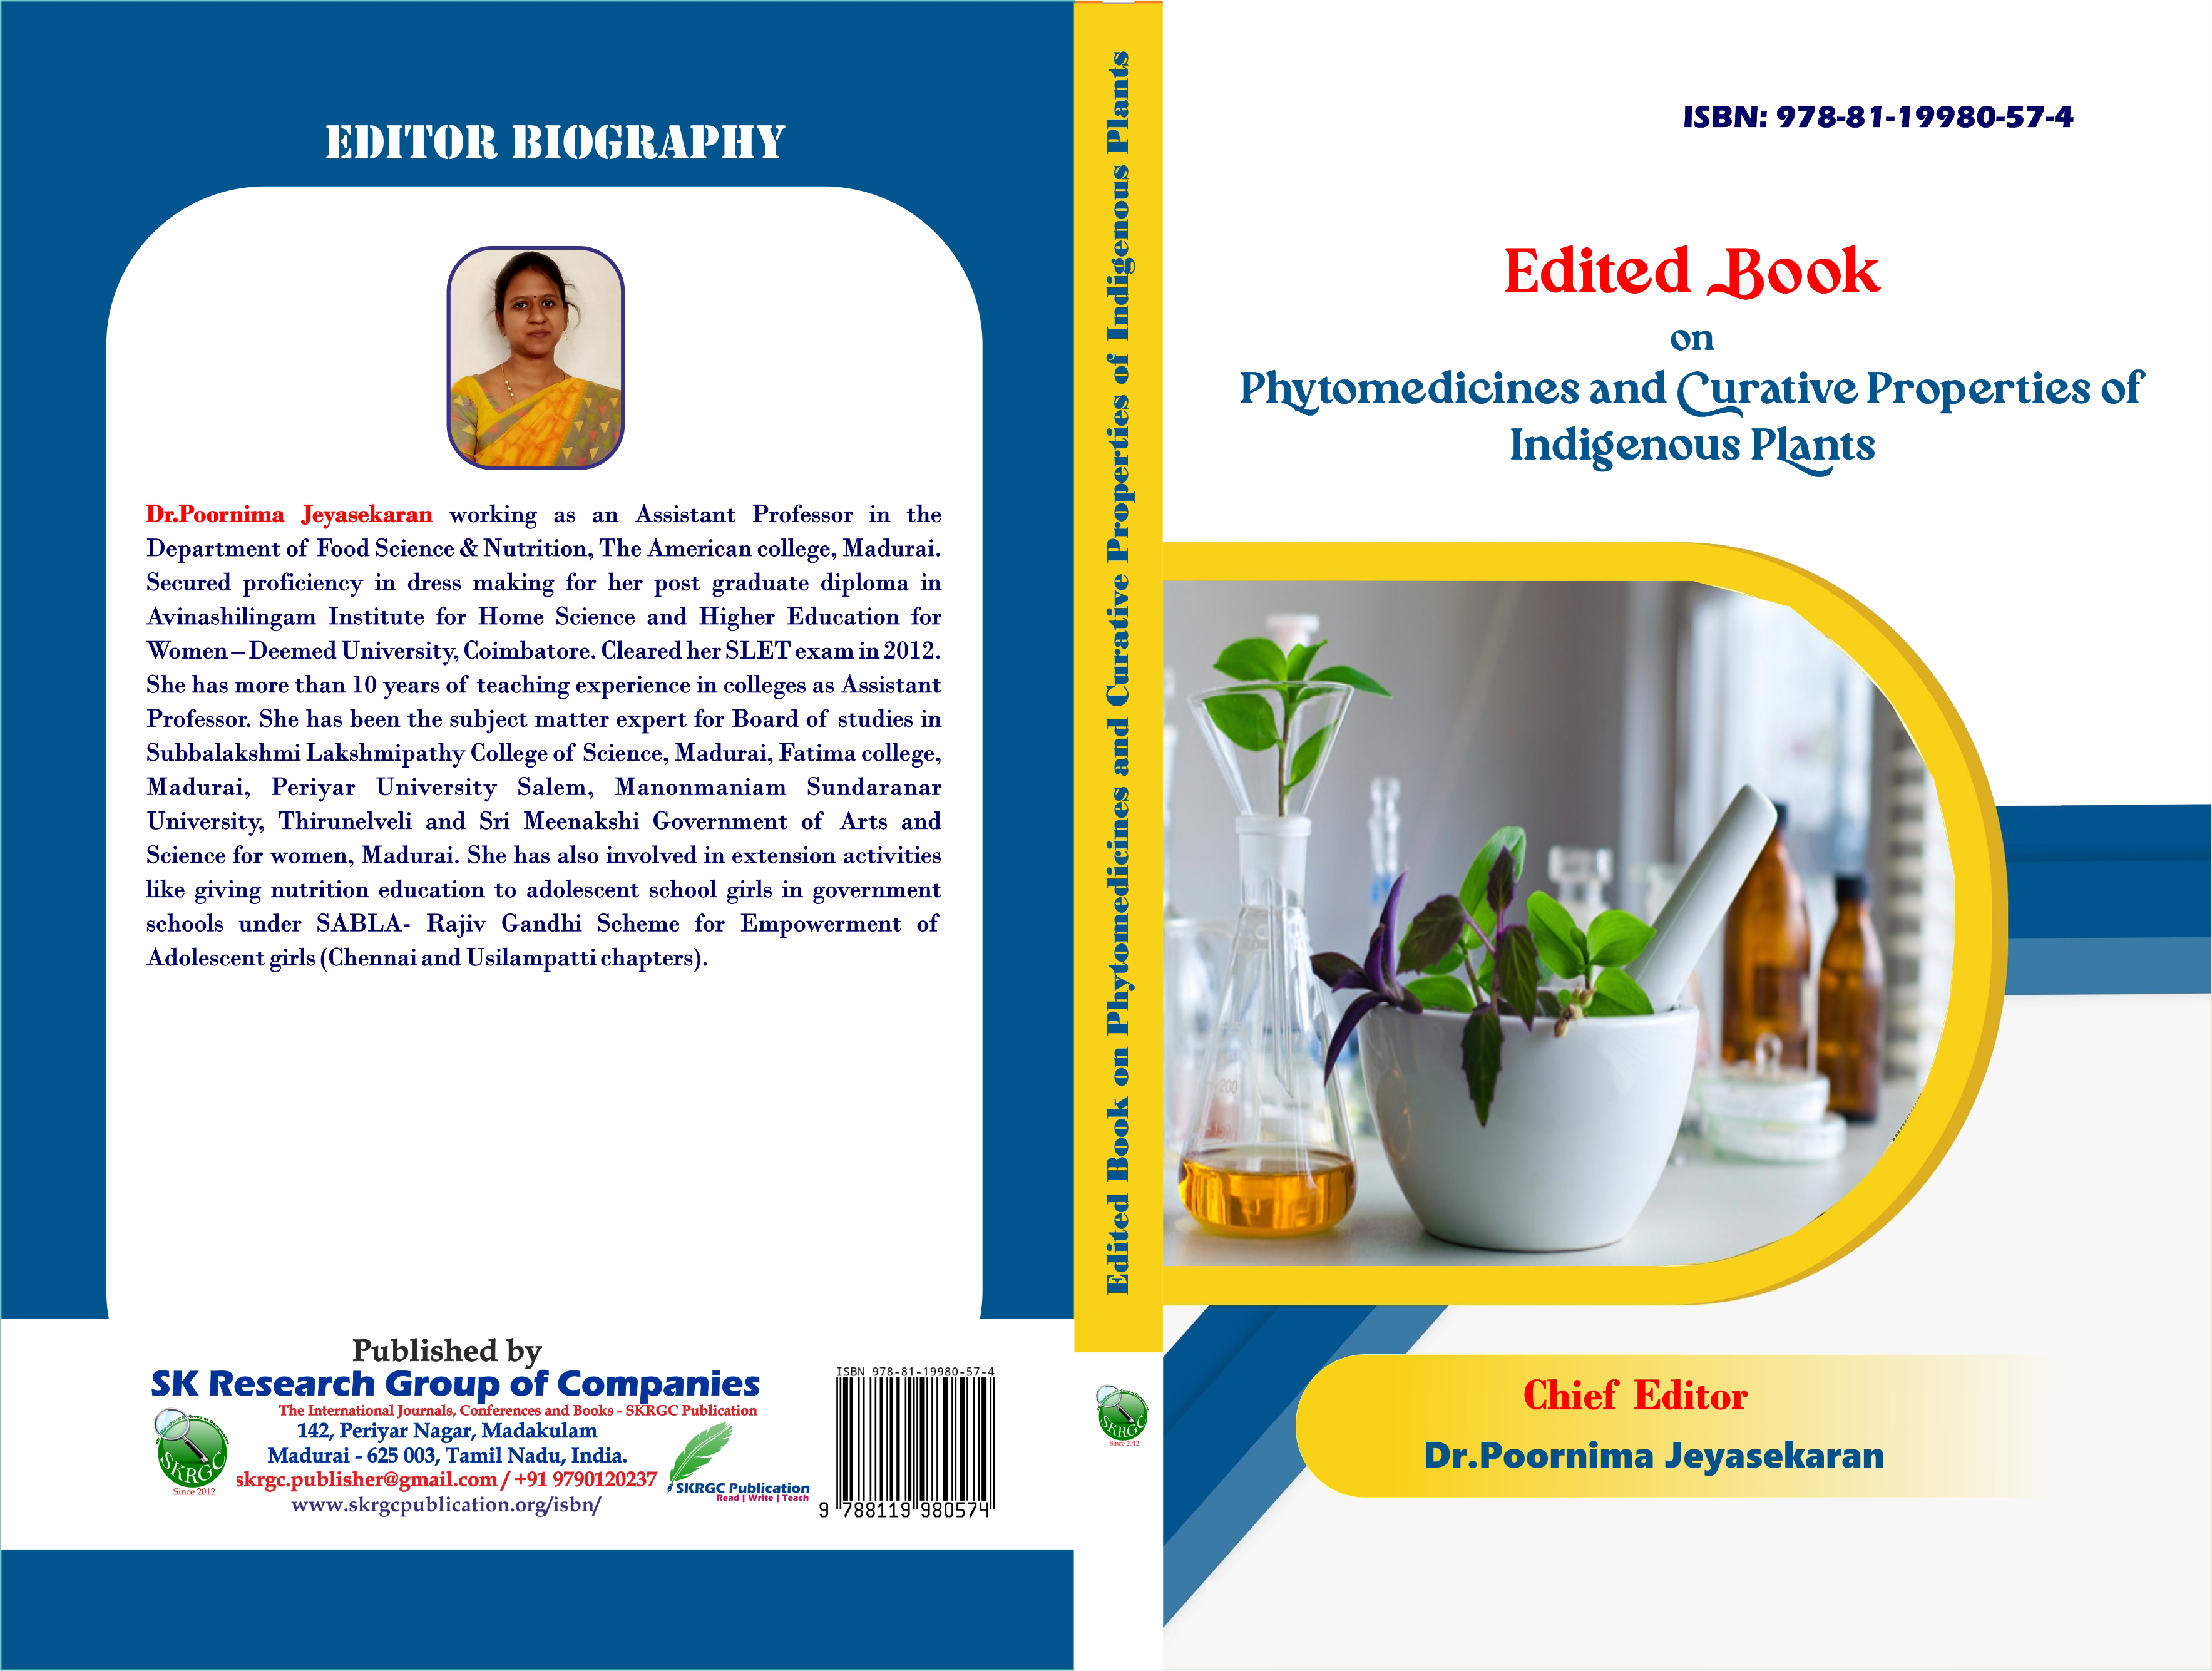 Edited Book on Phytomedicines and Curative Properties of Indigenous Plants